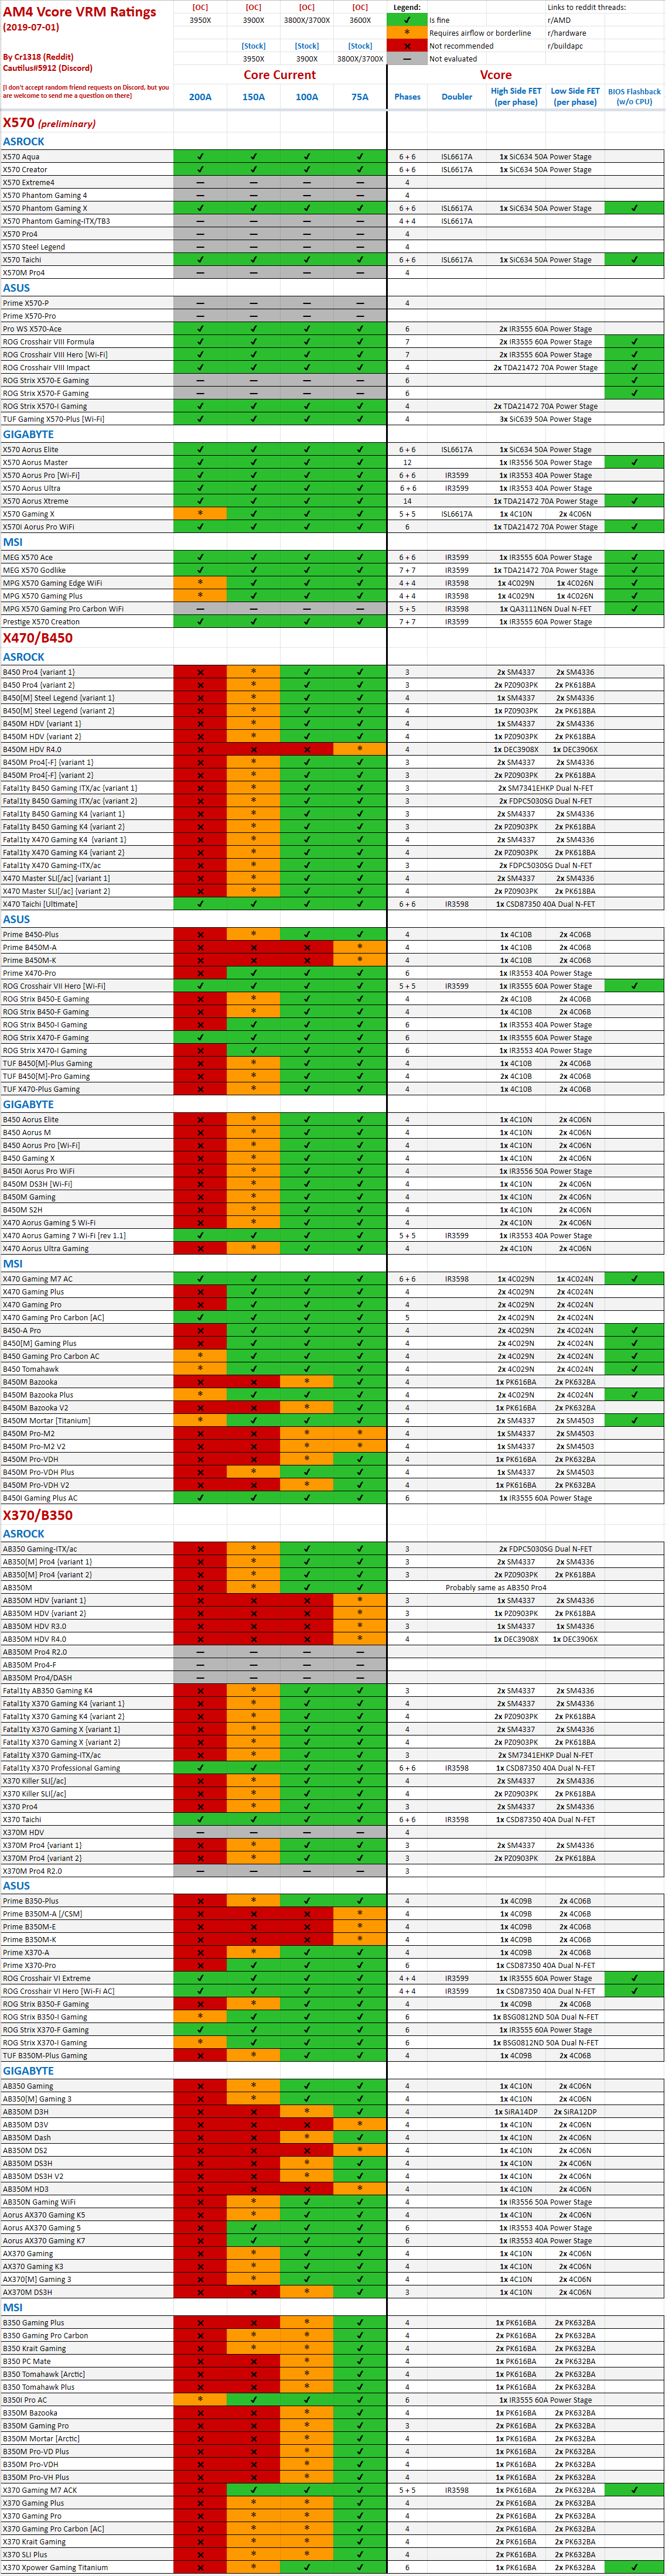 Motherboard Cpu Compatibility Chart